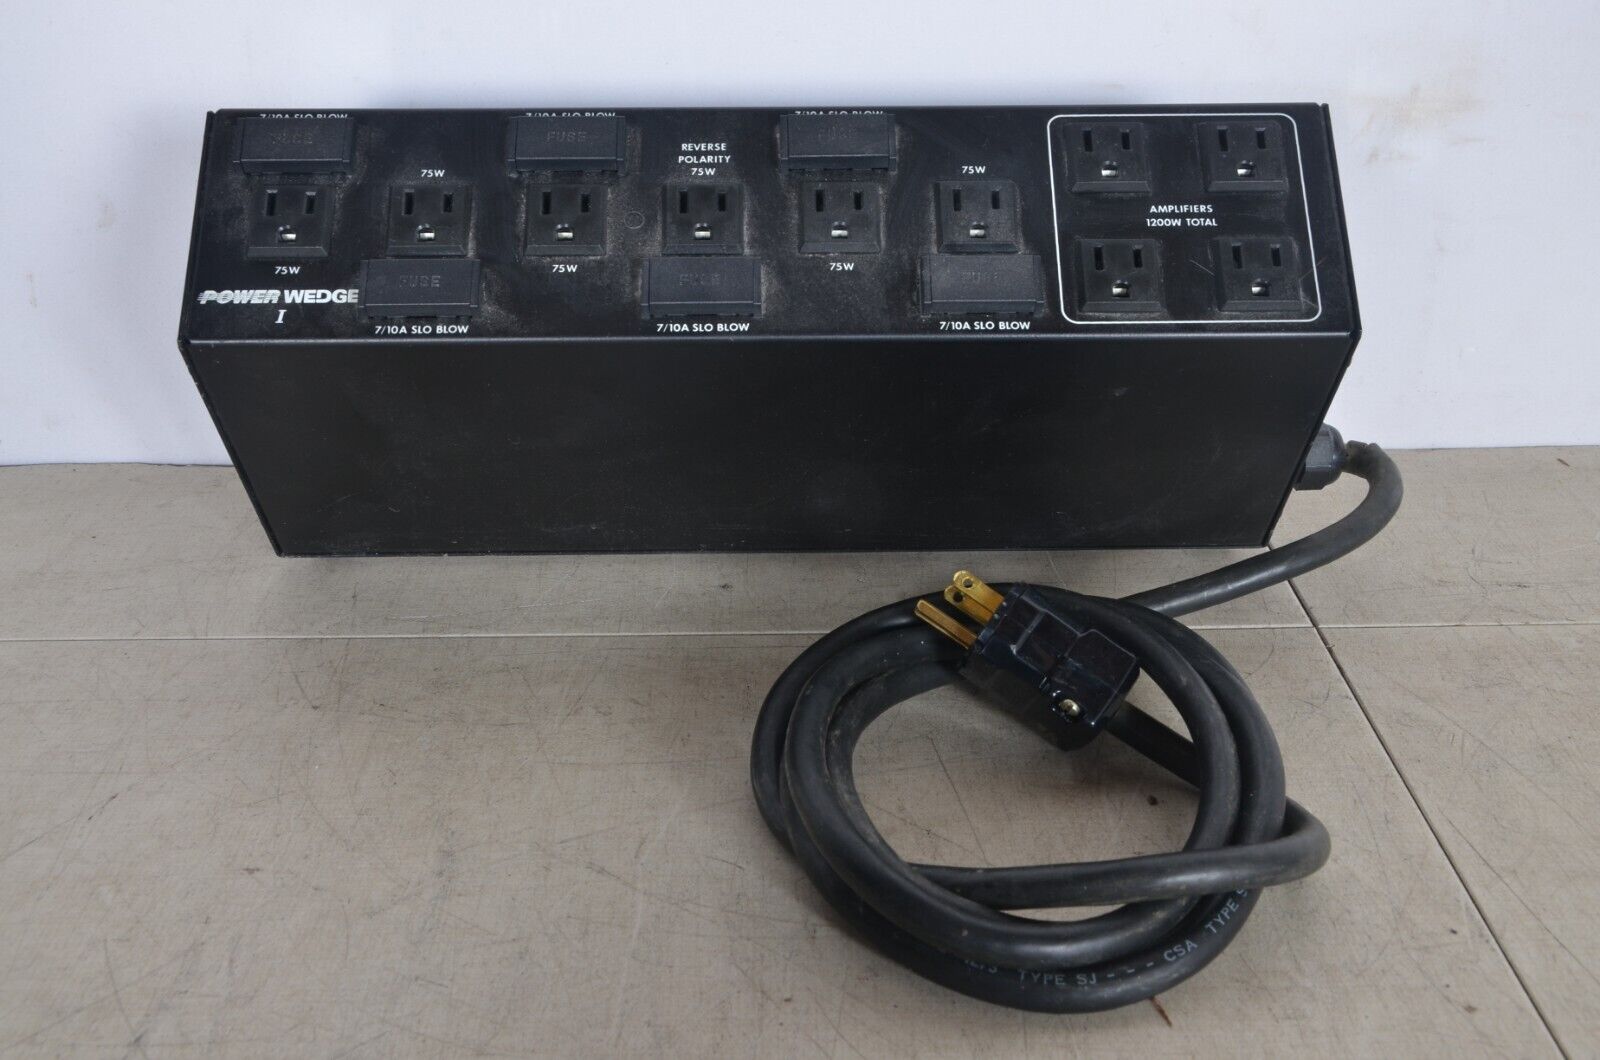 AUDIO POWER INDUSTRIES POWER WEDGE I PW I MODEL 1 POWER CONDITIONER WORKS GREAT